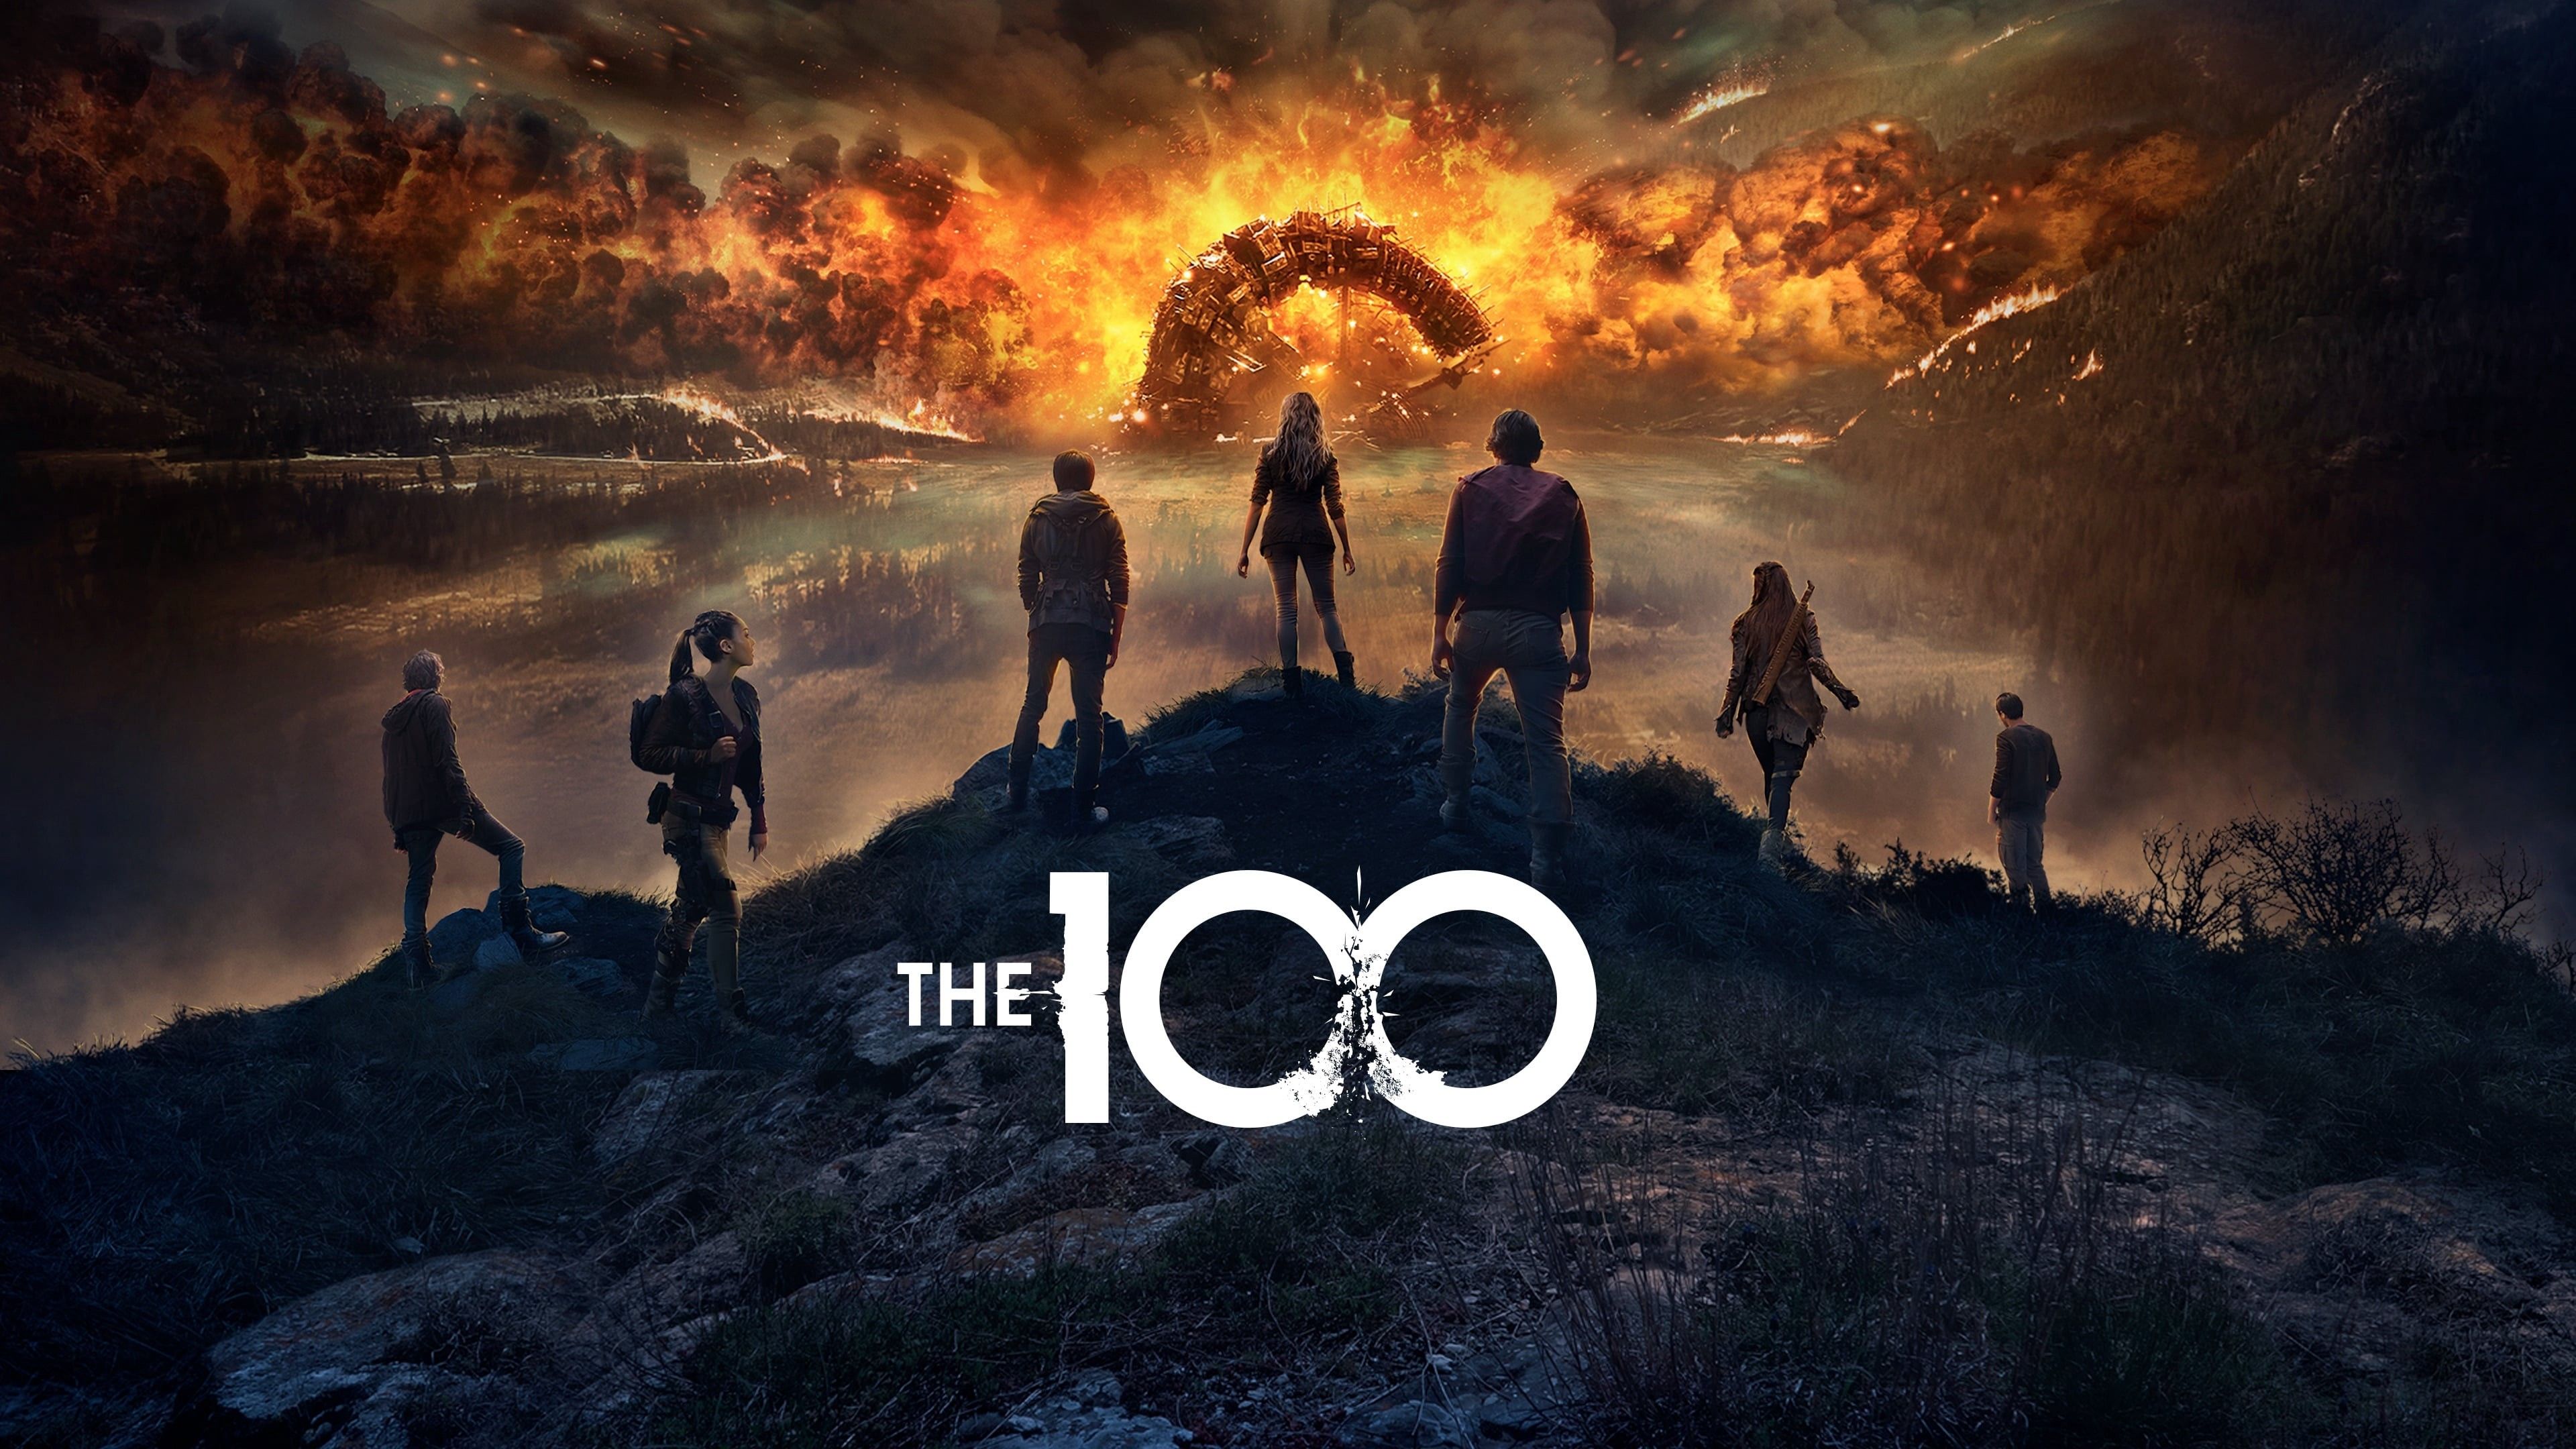 The 100 Season HD Tv Shows, 4k Wallpaper, Image, Background, Photo and Picture